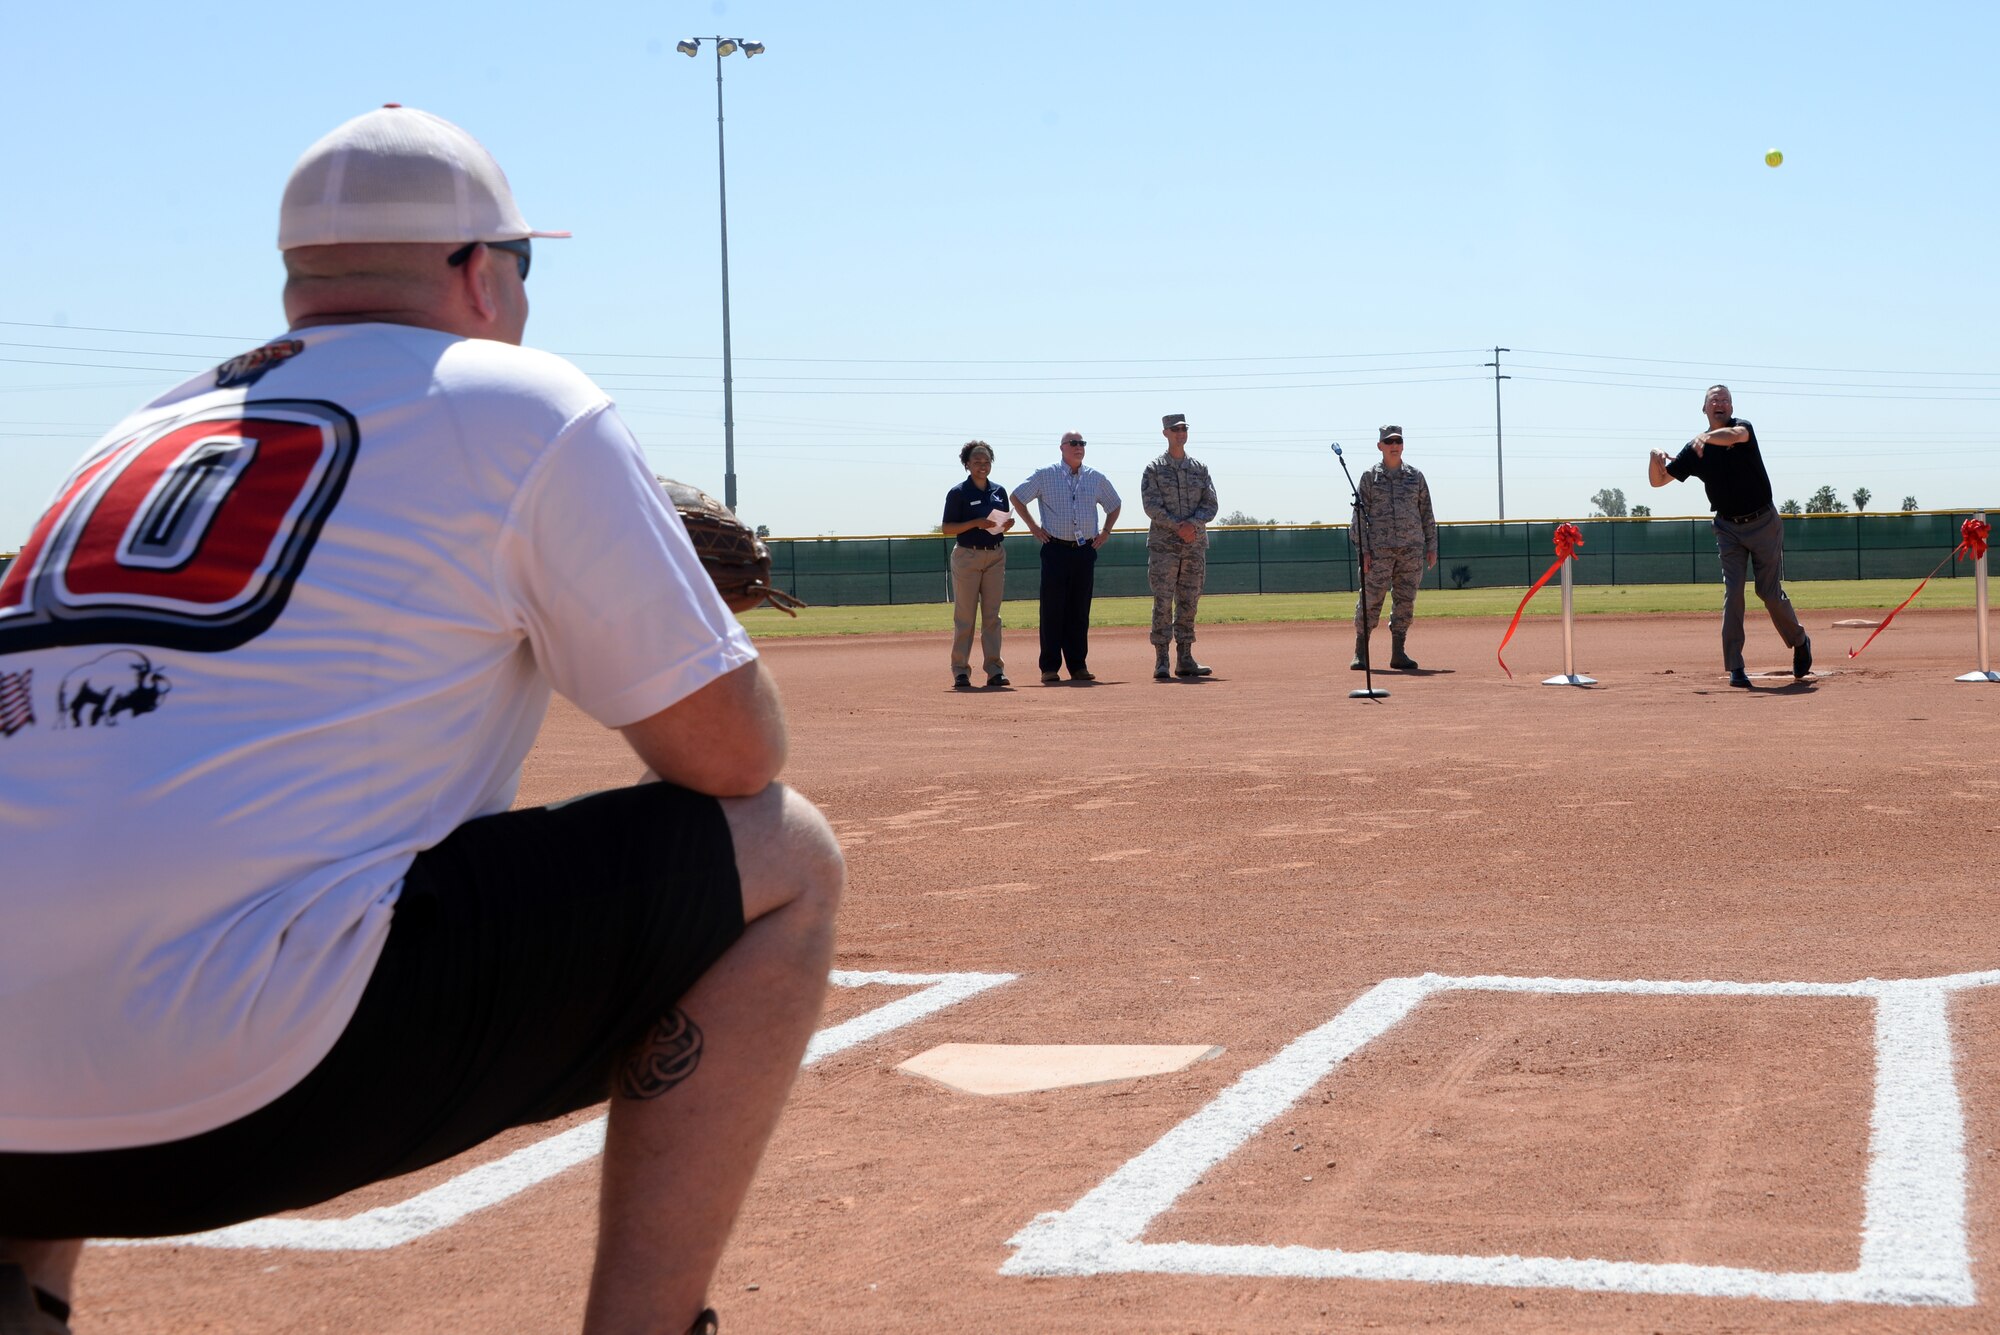 Mark Grace, former Arizona Diamondbacks first baseman, throws the ceremonial pitch during the scoreboard ribbon cutting ceremony April 23, 2018, at Luke Air Force Base, Ariz. The Diamondbacks, together with Arizona Public Service, presented Luke AFB with a new scoreboard for field number three. (U.S. Air Force photo by Senior Airman Devante Williams)